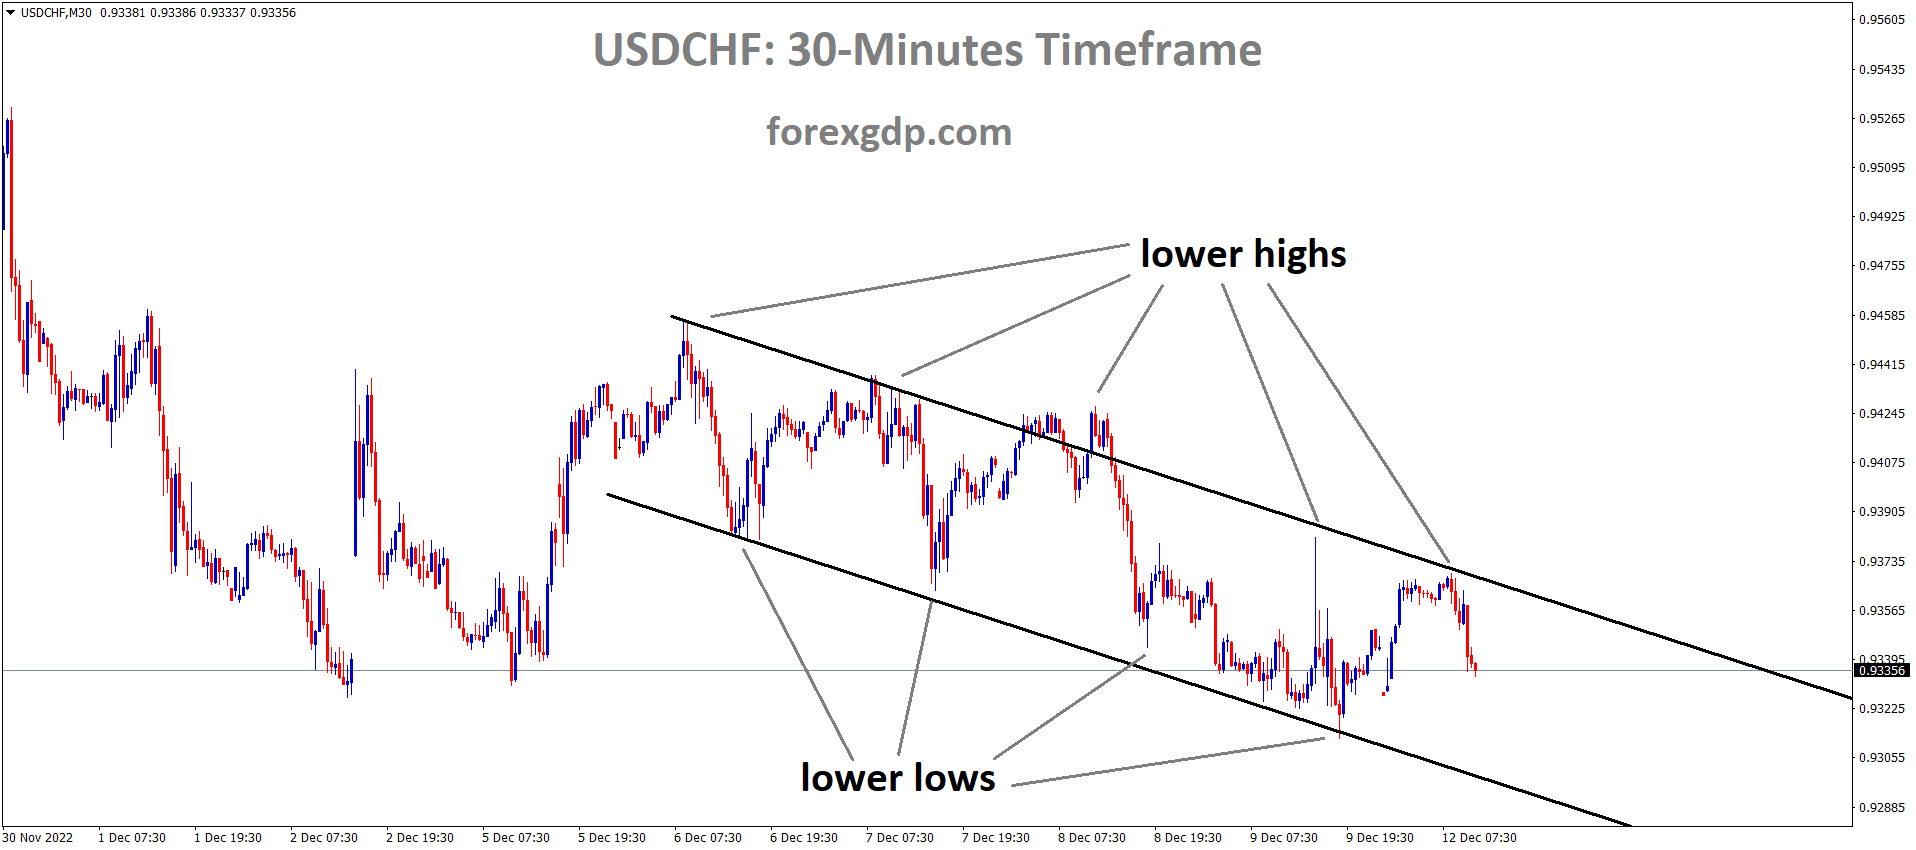 USDCHF is moving in the Descending channel and the market has fallen from the lower high area of the channel